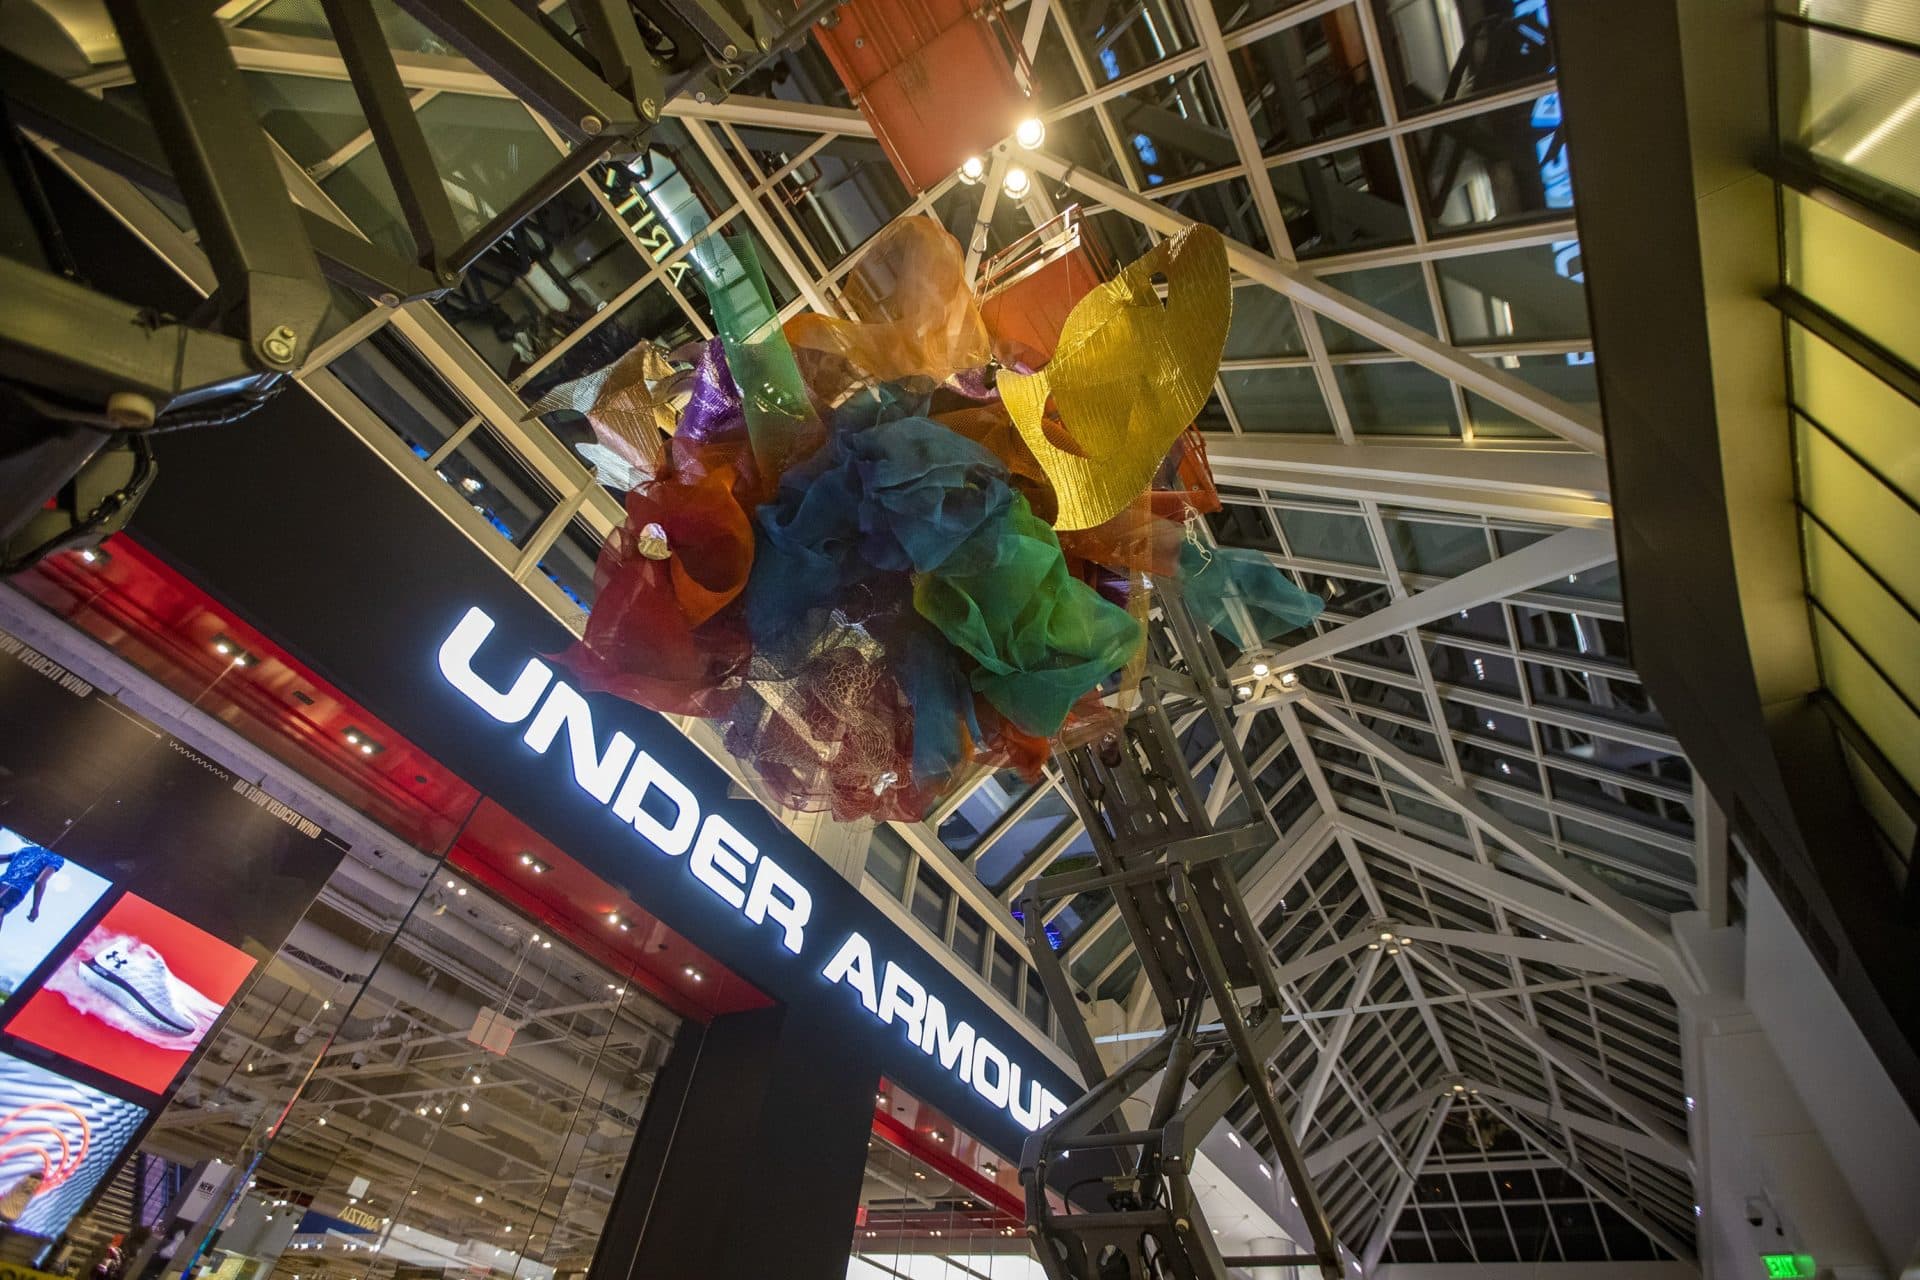 Workers hoist one of three “Astral Beings” to be suspended from the ceiling in the main corridor of the Prudential Center Mall. (Jesse Costa/WBUR)